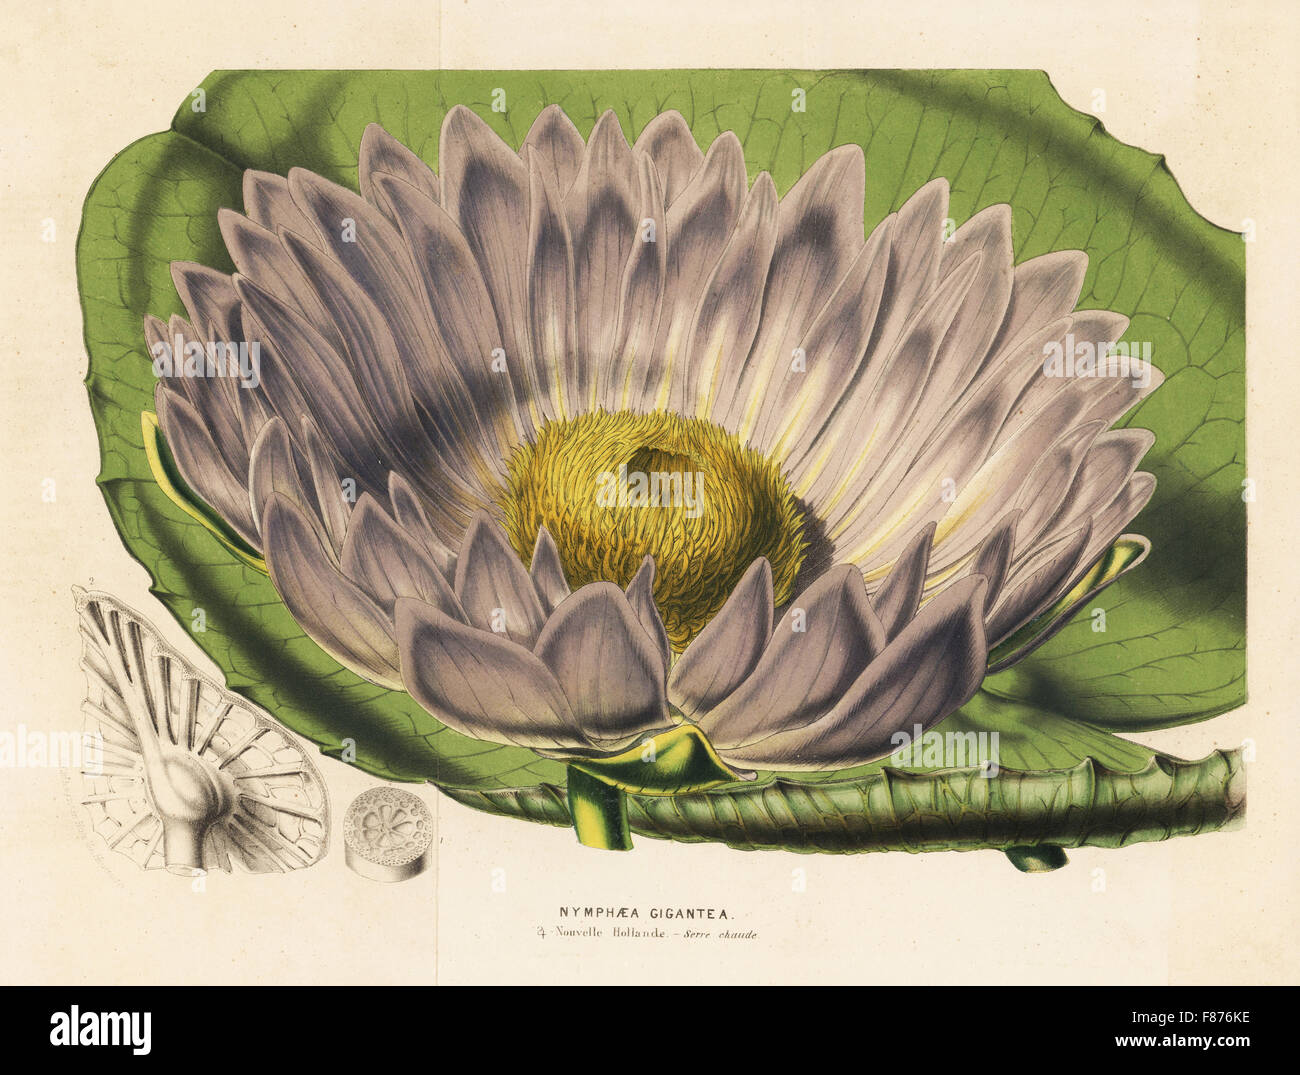 Gigantic water lily variety, Victoria amazonica (Nymphaea gigantea or Victoria fitzroyana). Handcoloured lithograph from Louis van Houtte and Charles Lemaire's Flowers of the Gardens and Hothouses of Europe, Flore des Serres et des Jardins de l'Europe, Ghent, Belgium, 1851. Stock Photo